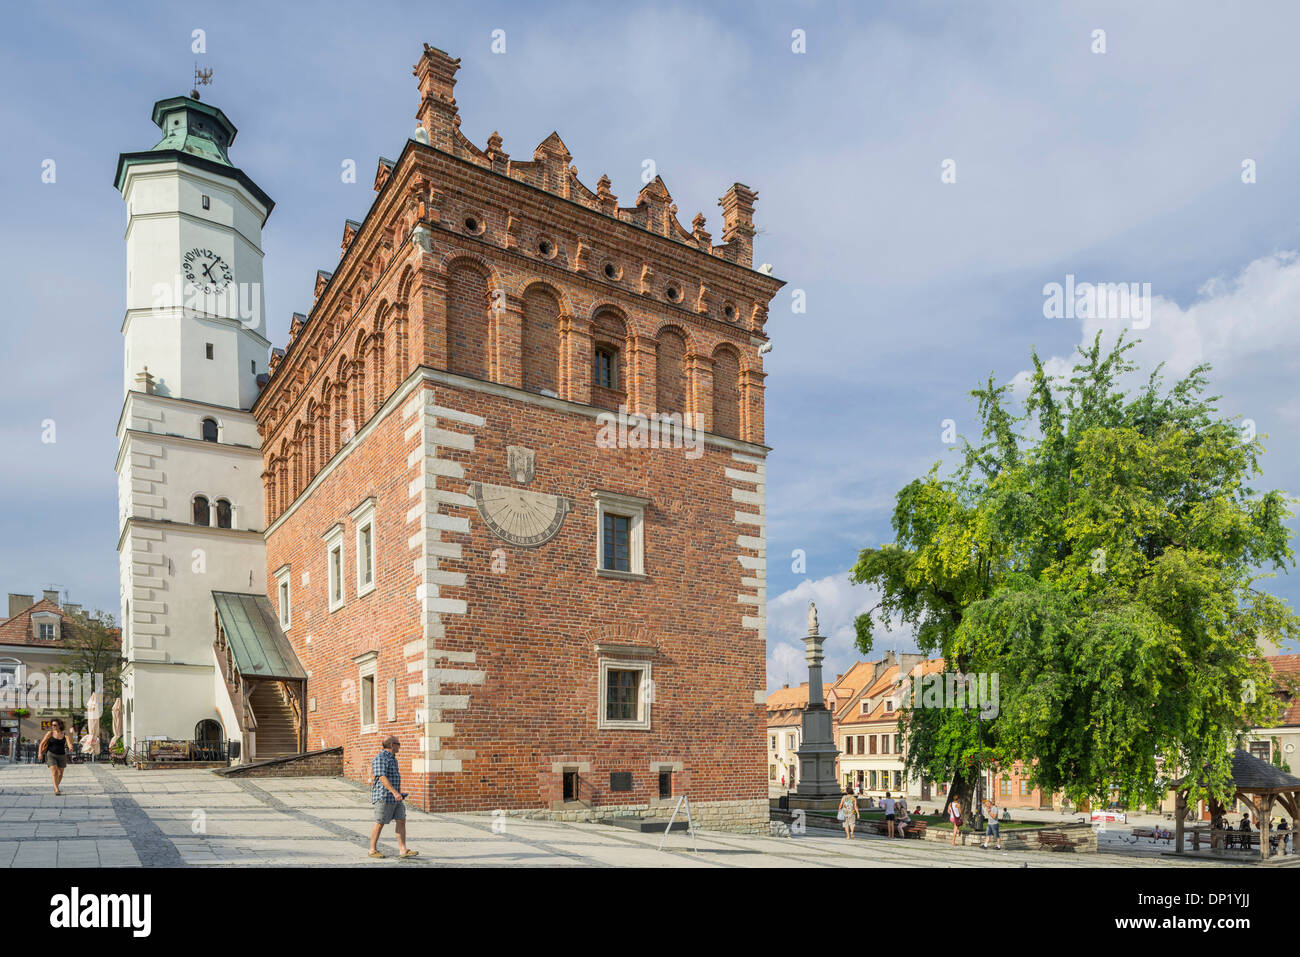 Town Hall with a tower at the market place, Tarnów, Lesser Poland Voivodeship, Poland Stock Photo